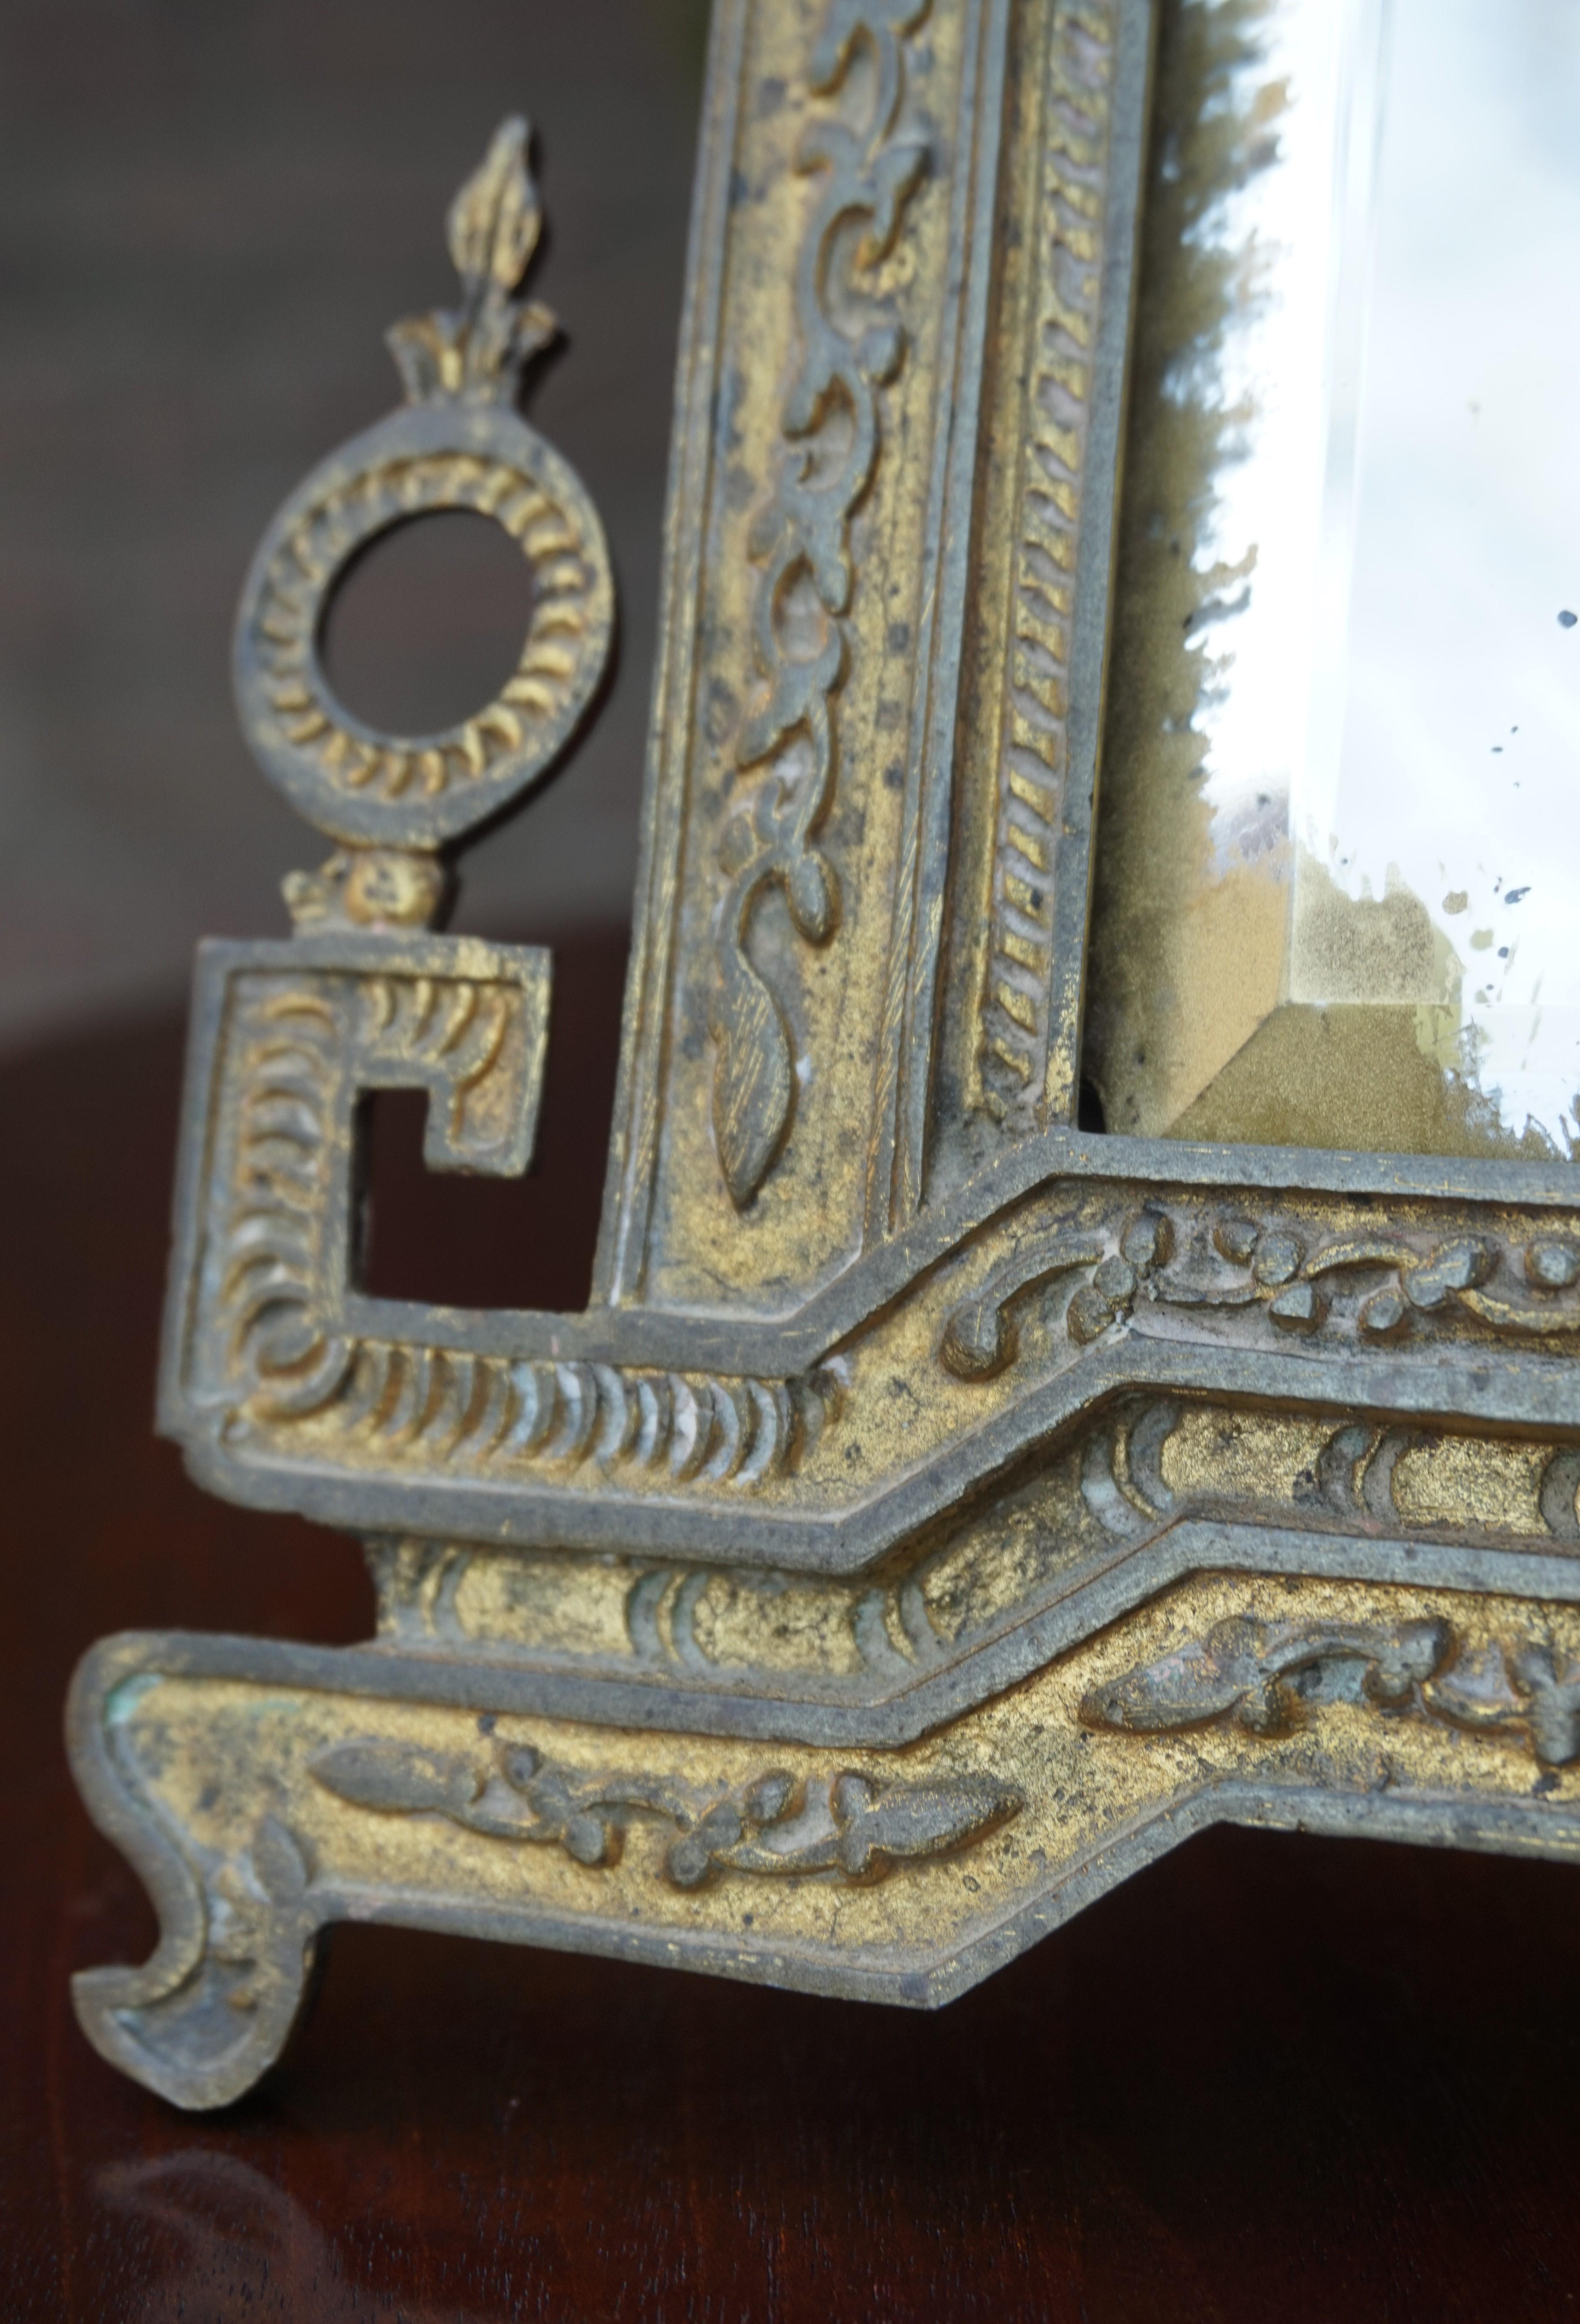 Late 19th or Early 20th Century Chinese or Chinoiserie Gilt Ormolu Table Mirror For Sale 2